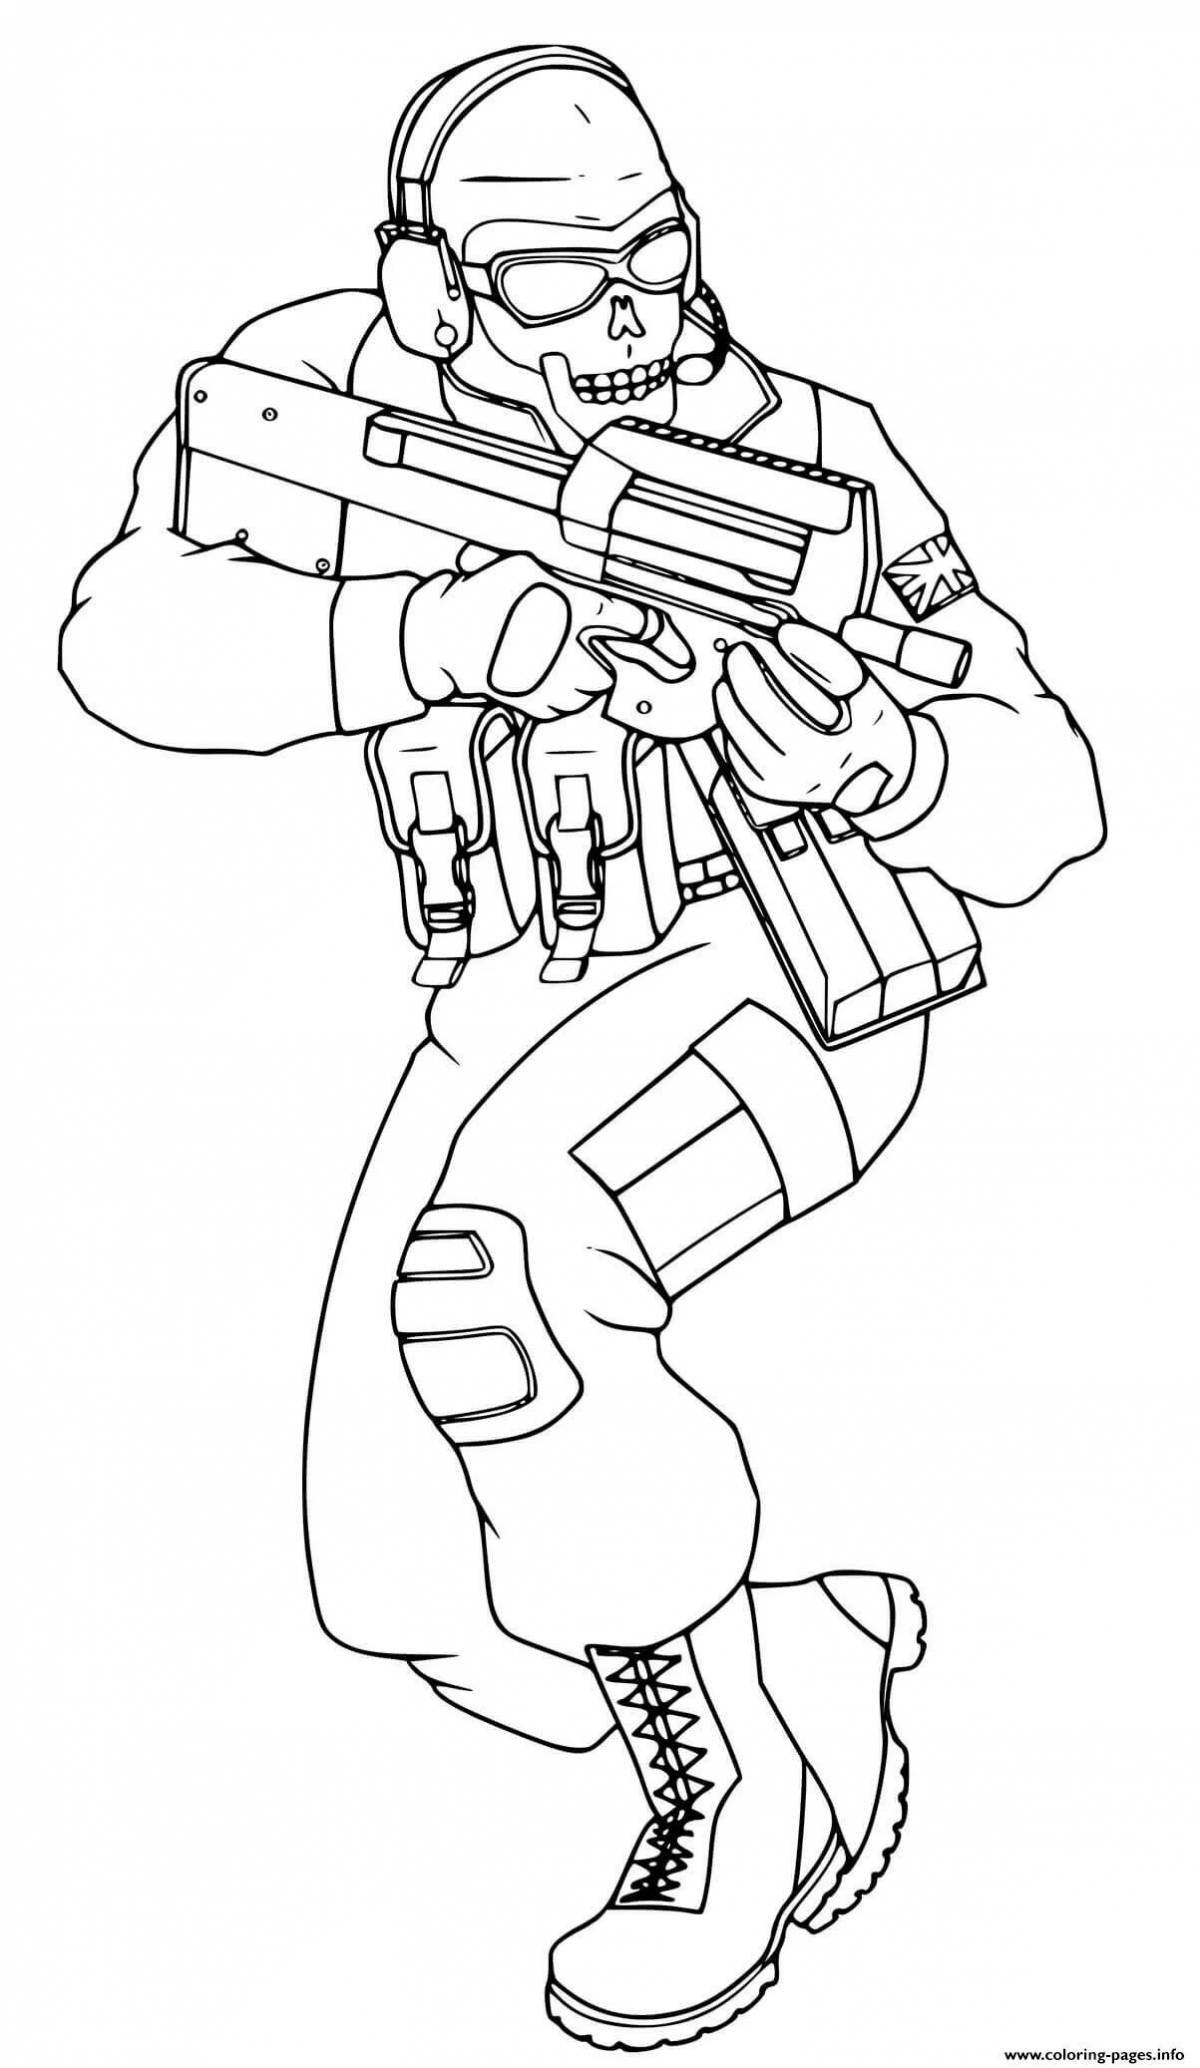 Fun standoff skins coloring page